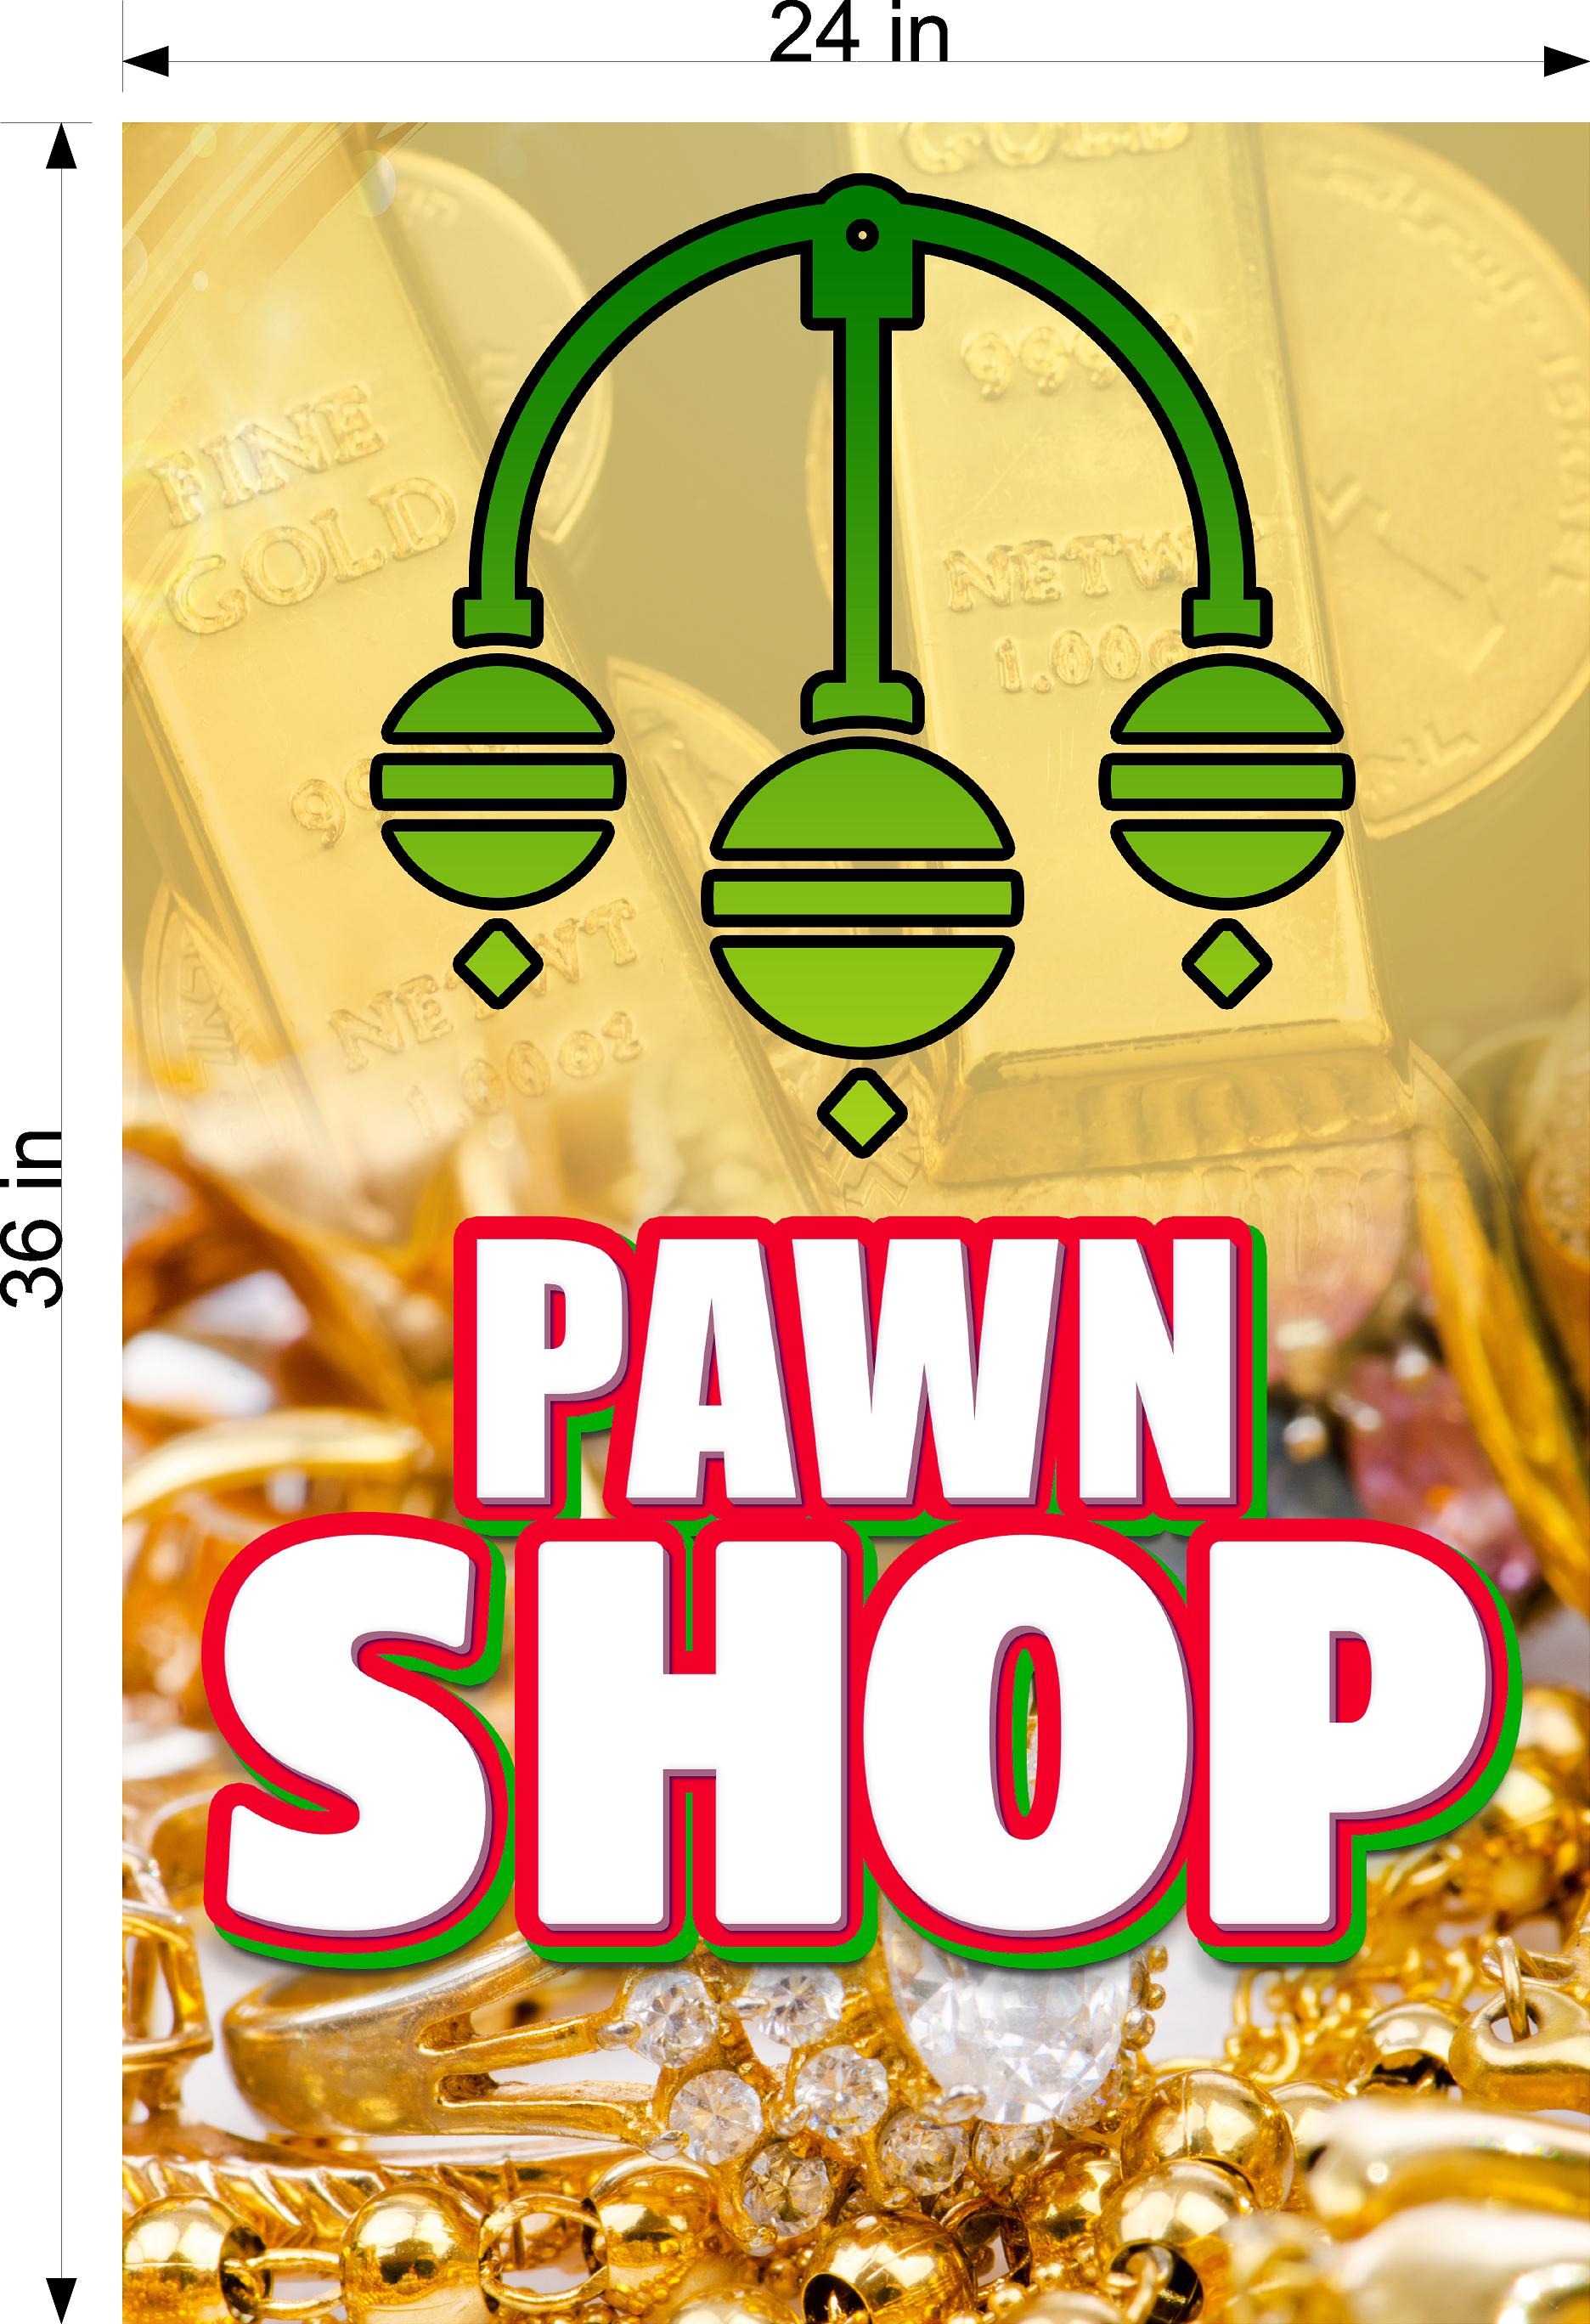 Pawn Shop 08 Photo-Realistic Paper Poster Premium Interior Inside Sign Buy Gold Silver Jewelry Wall Window Non-Laminated Vertical